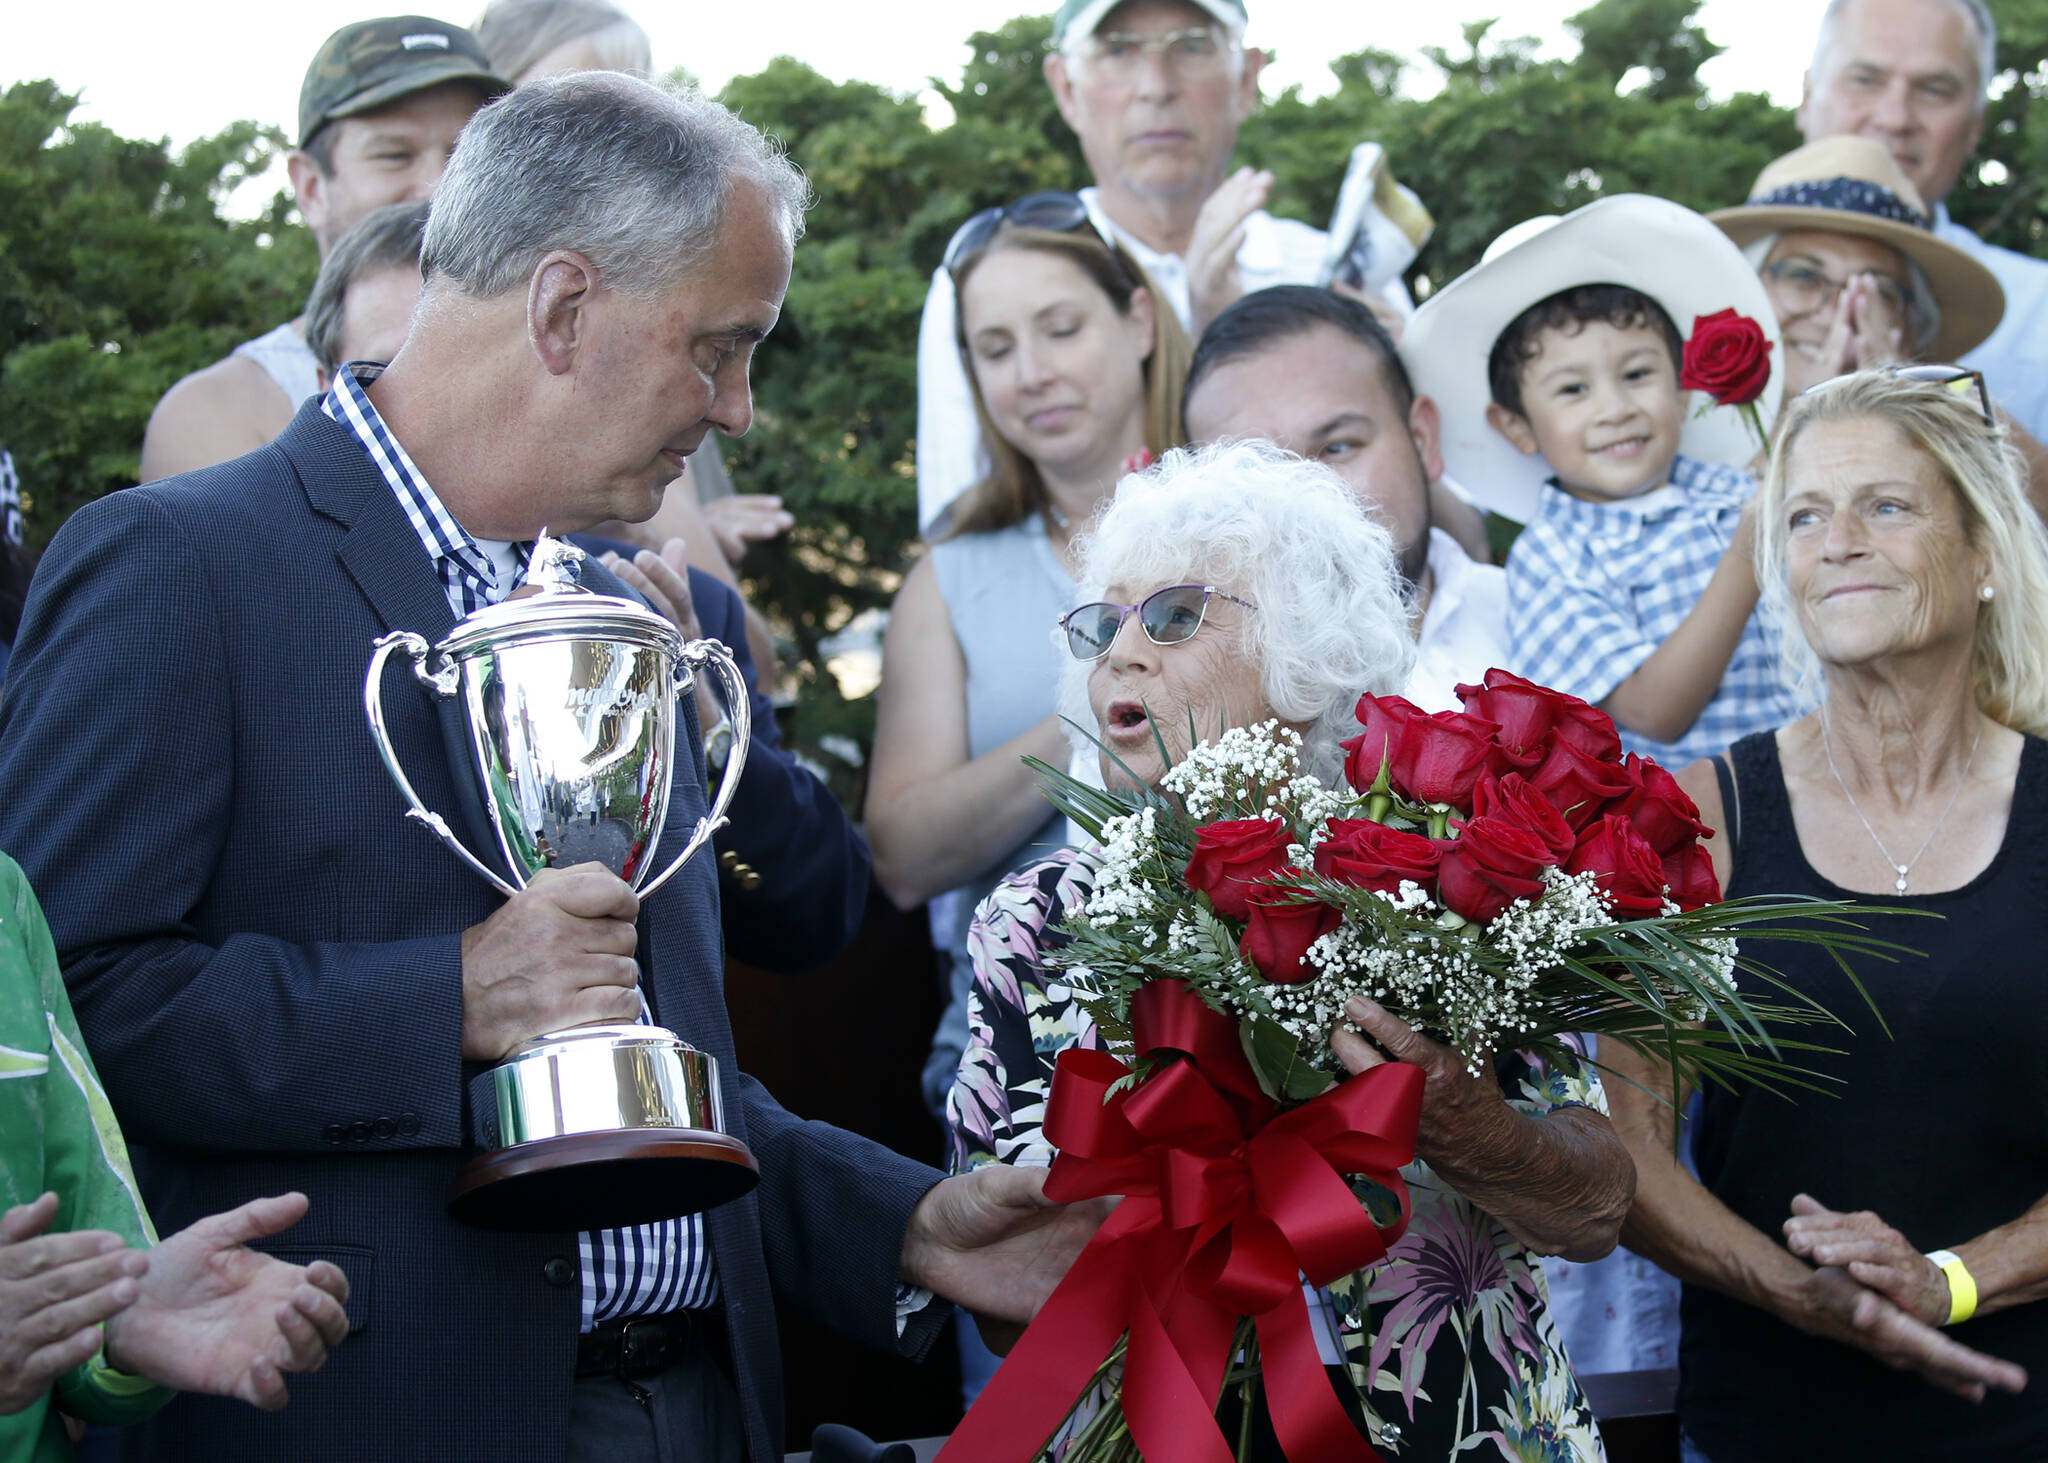 Darlyne Krieg receives the winning trophy at Longacres Mile. (Photo provided by Emerald Downs)